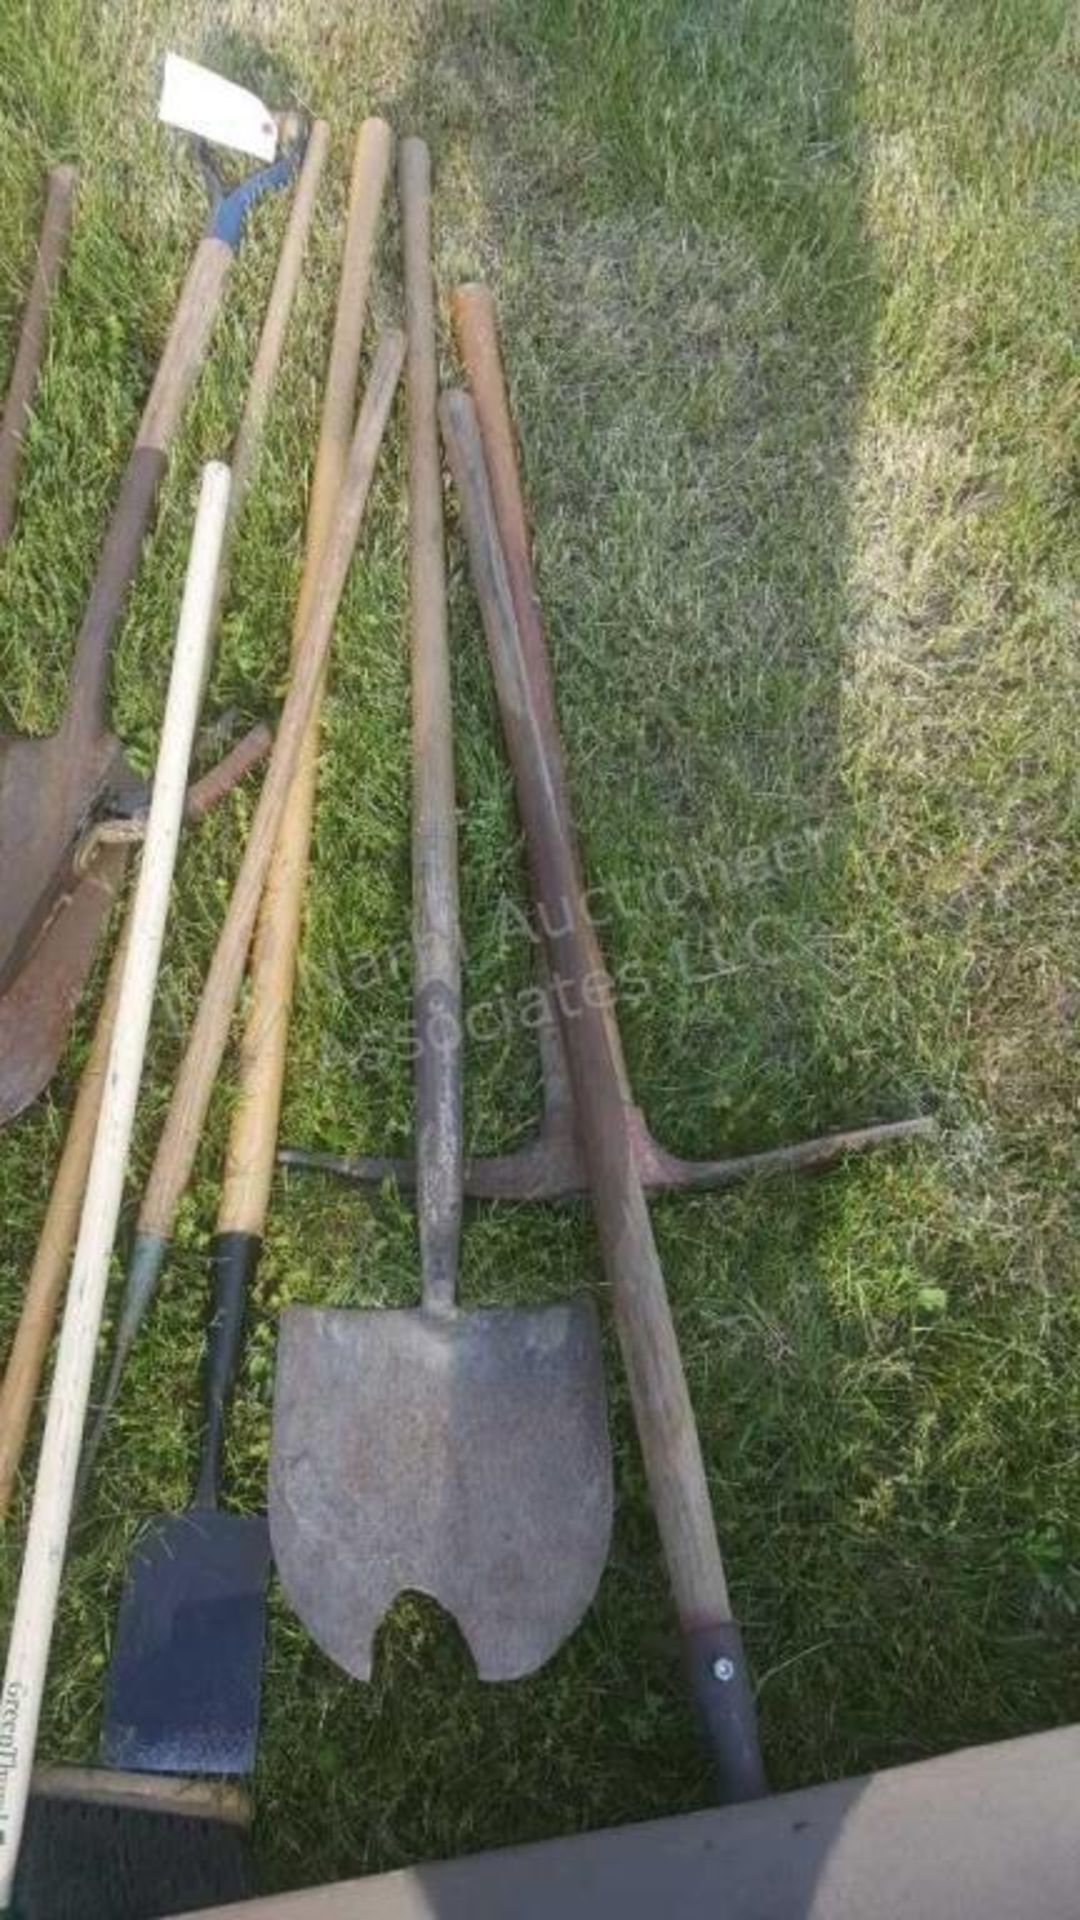 Group of yard tools - Image 3 of 3